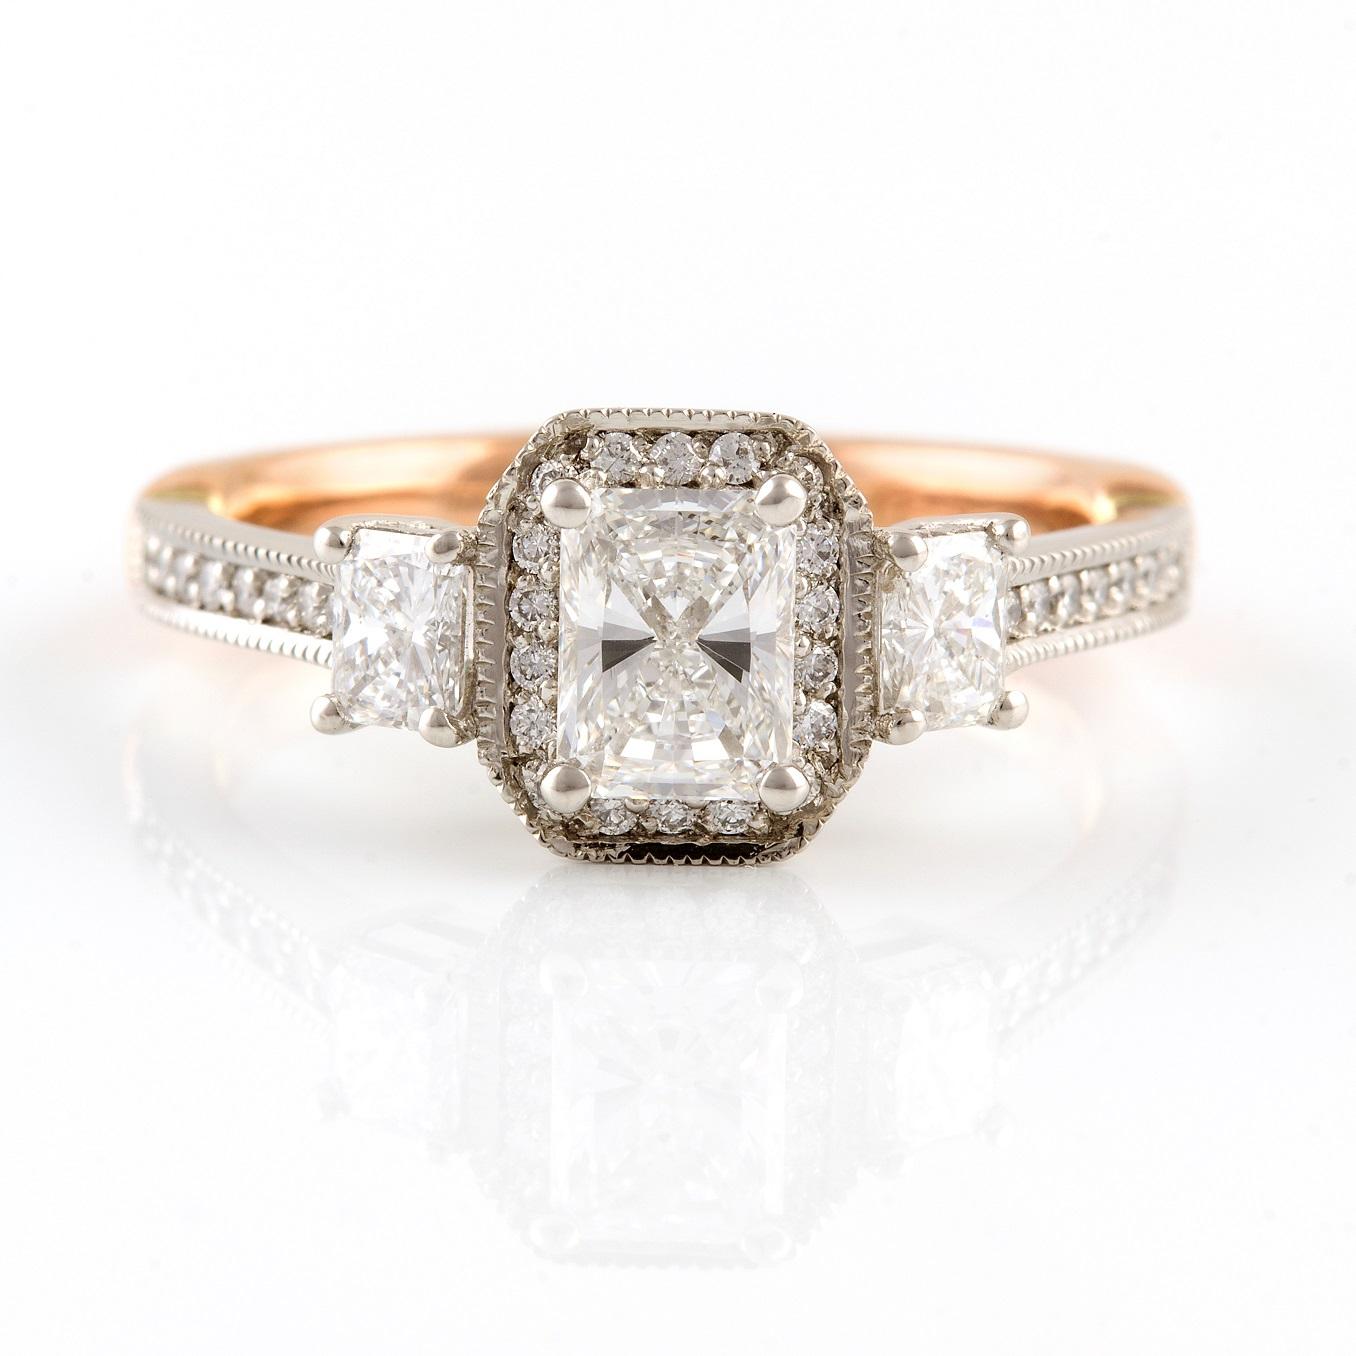 Platino Rosa Diamante Ring

This elegant vintage style ring has been sold however we are able to remake it by order in 20 working days. This ring consists of a beautiful four claw set radiant cut diamond that is surrounded by petite round diamonds.